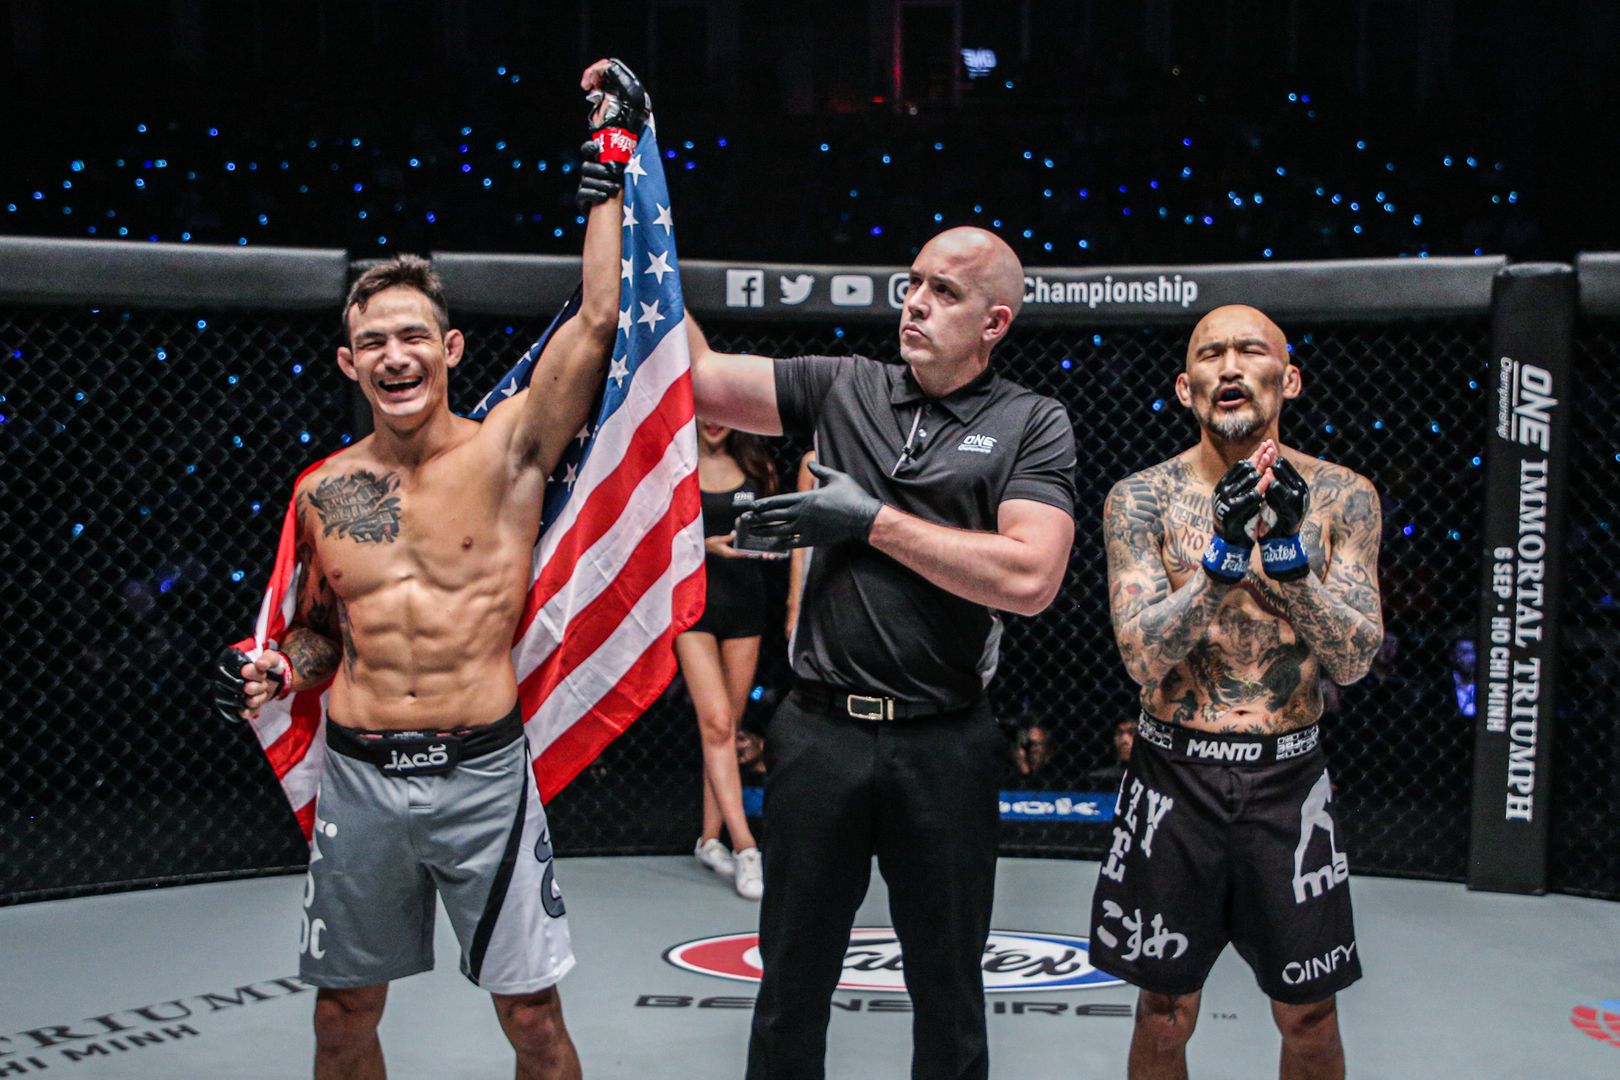 ONE Championship, ONE, link xem ONE Championship, ONE: DREAM OF GOLD, Thanh Le, MMA, Kickboxing